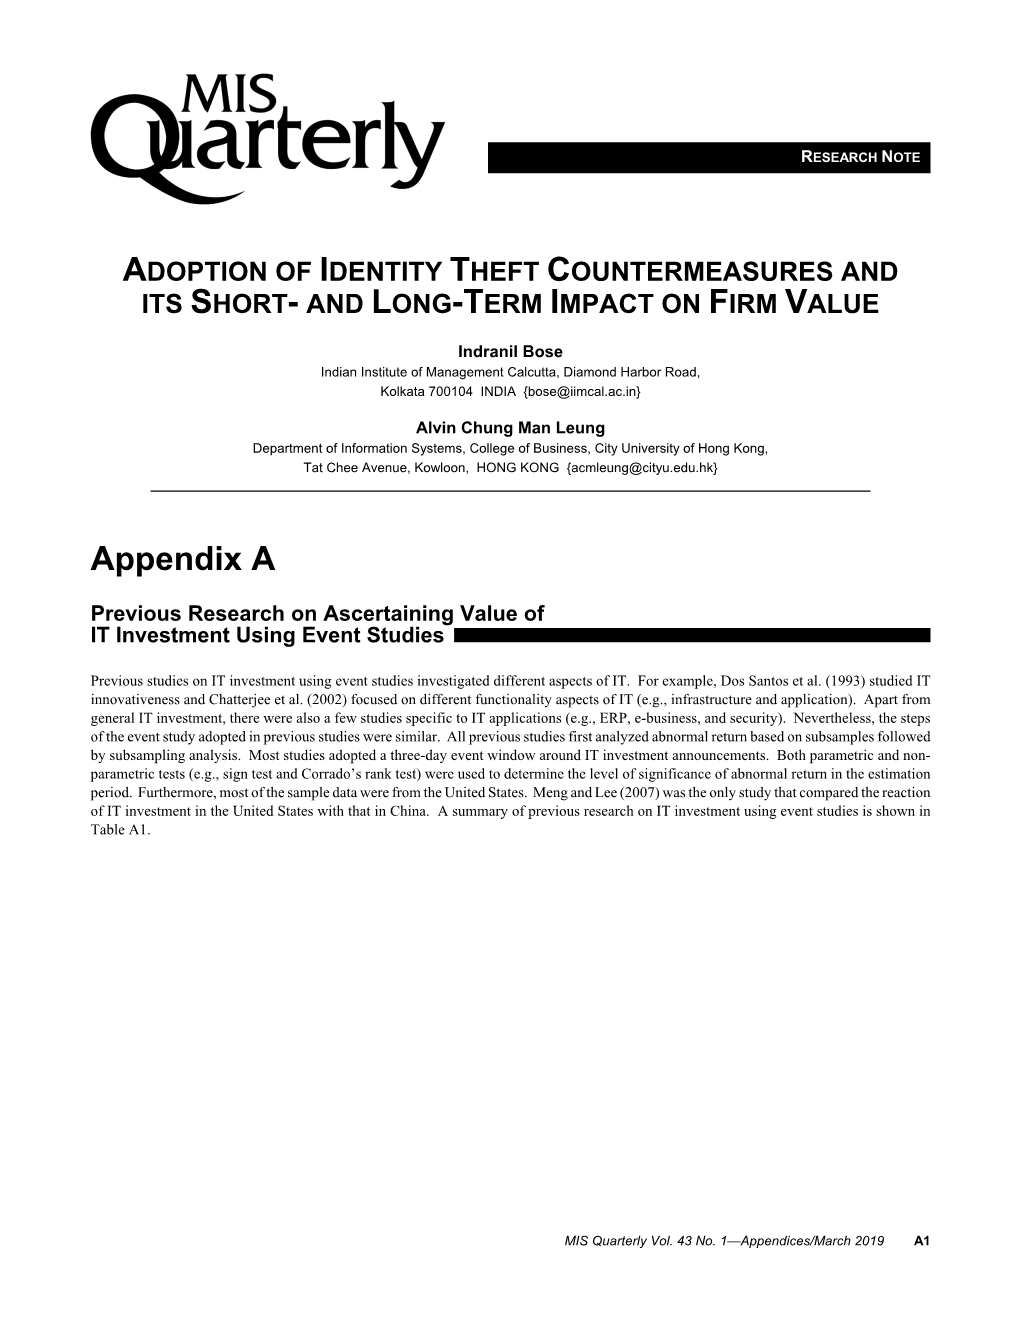 Adoption of Identity Theft Countermeasures and Its Short- and Long-Term Impact on Firm Value